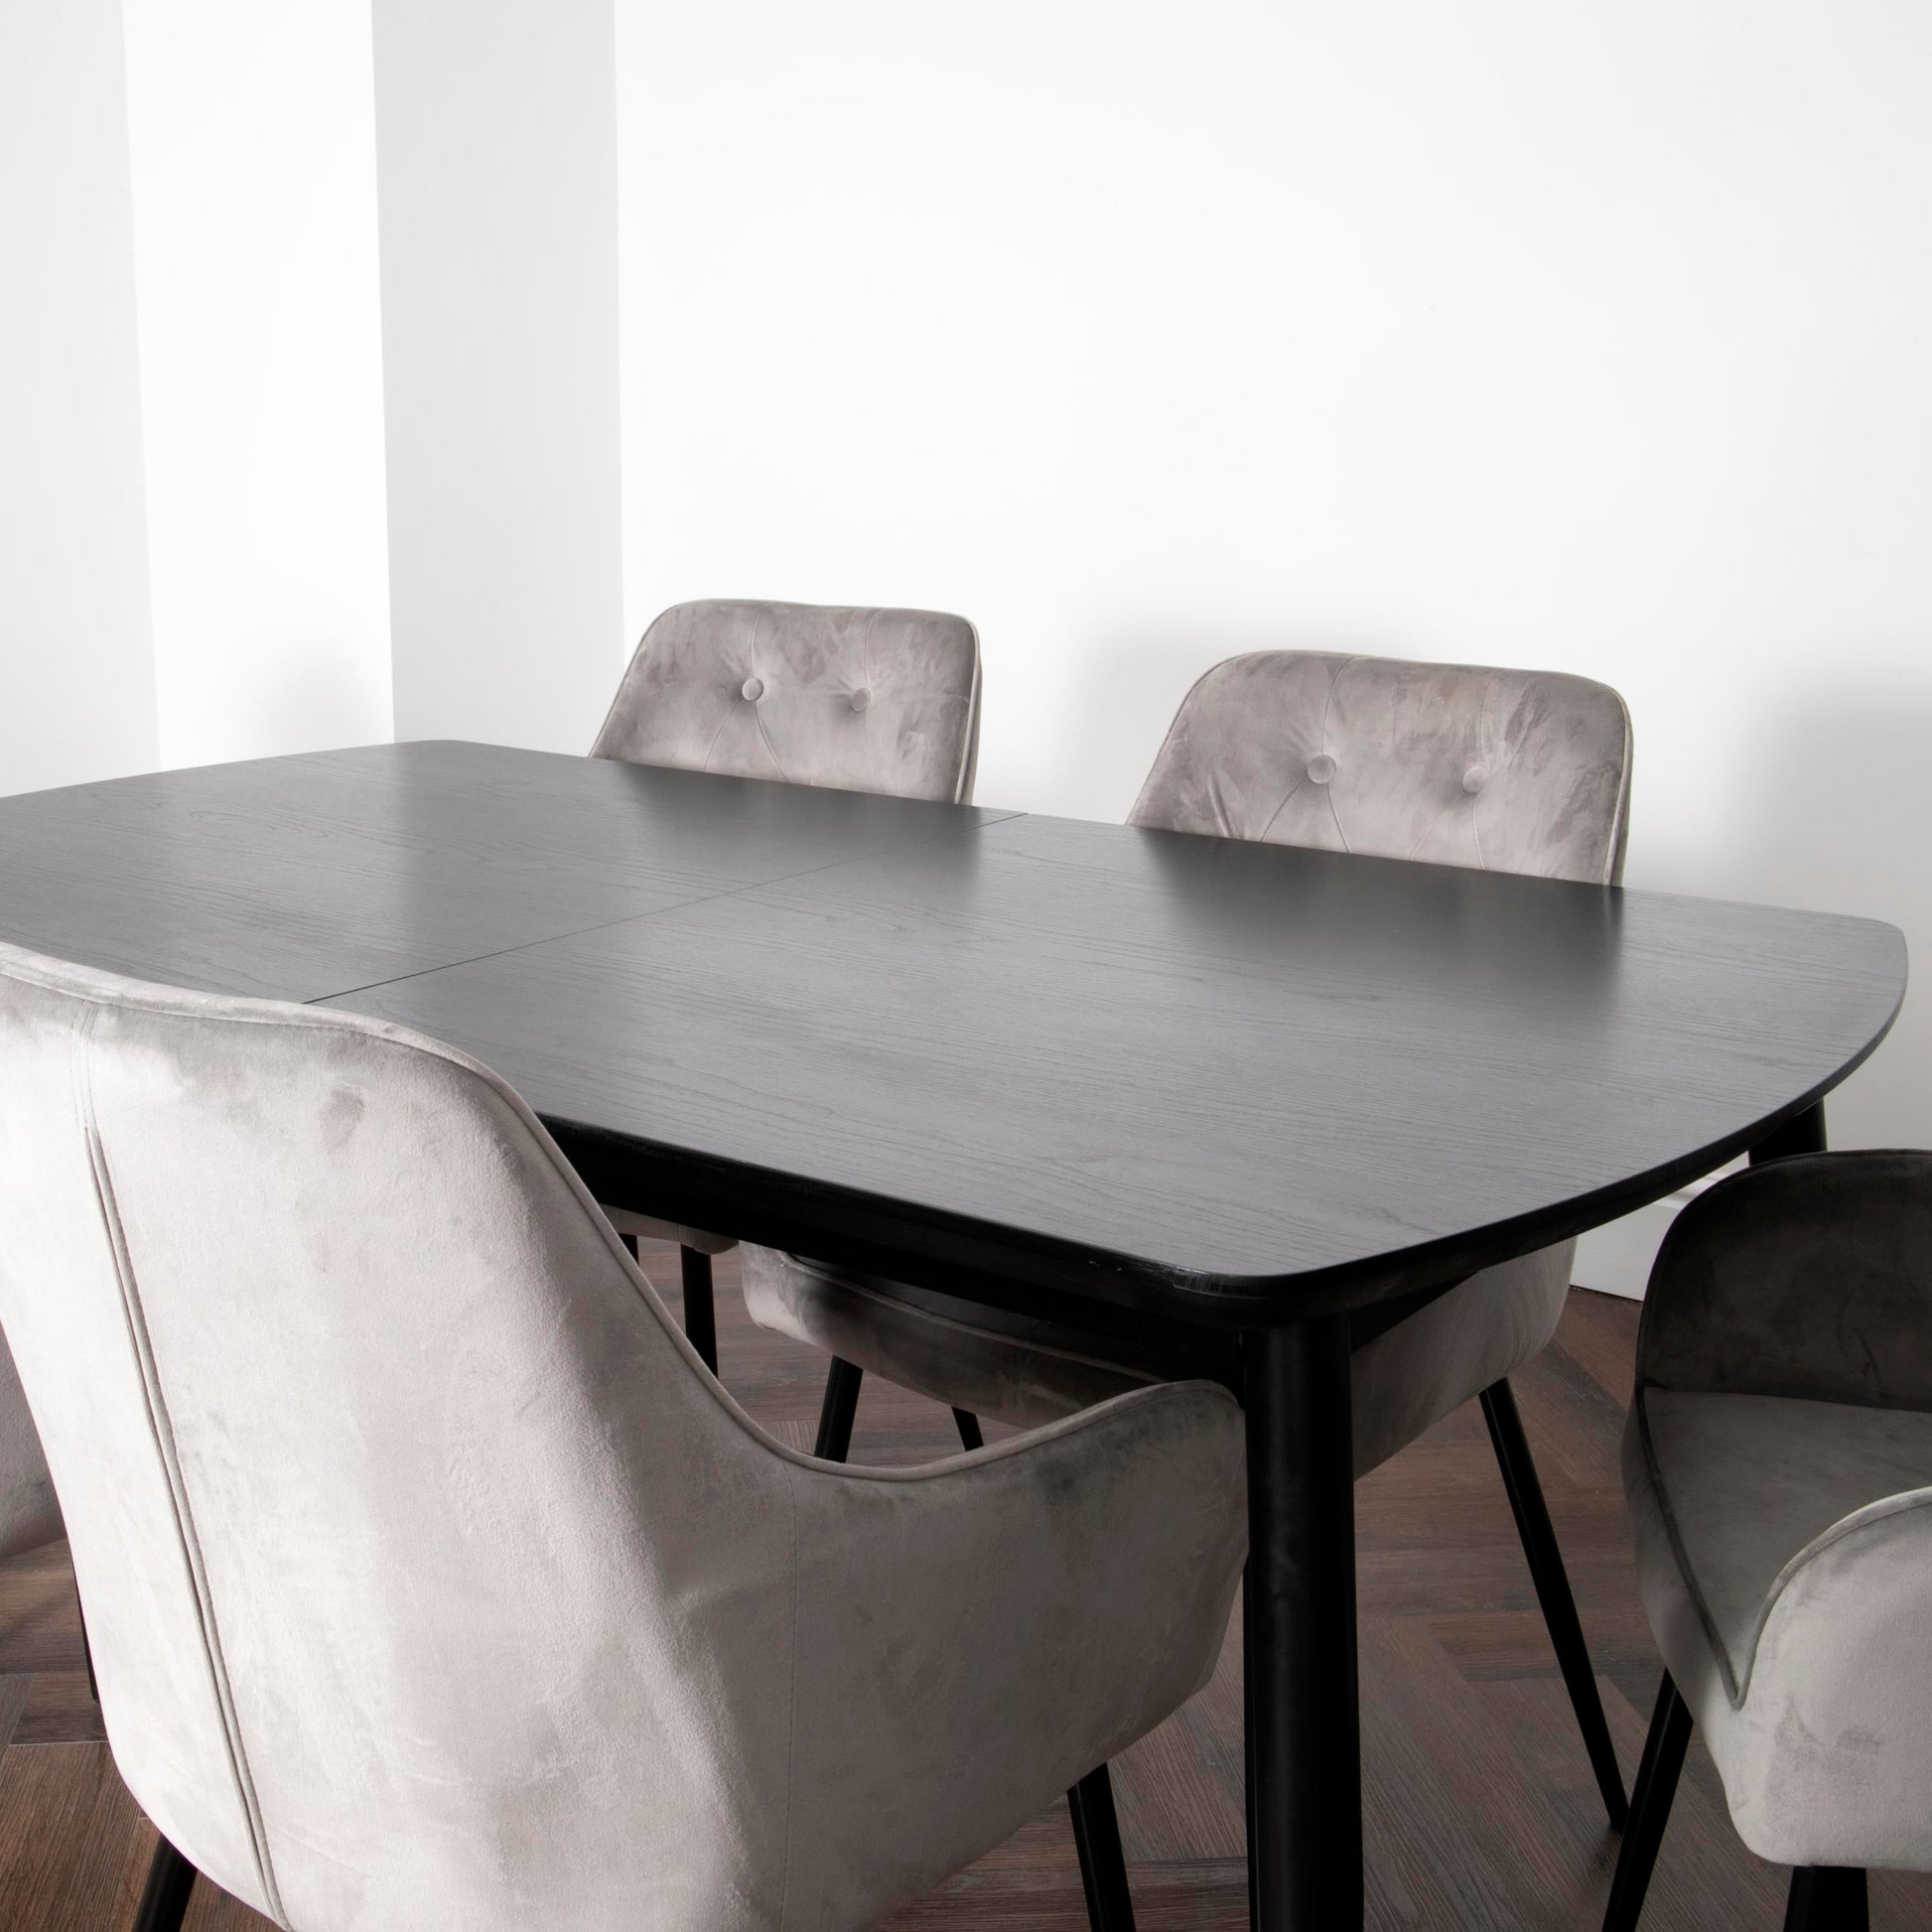 Dark Ash Oxford Dining Table with 6 Chairs